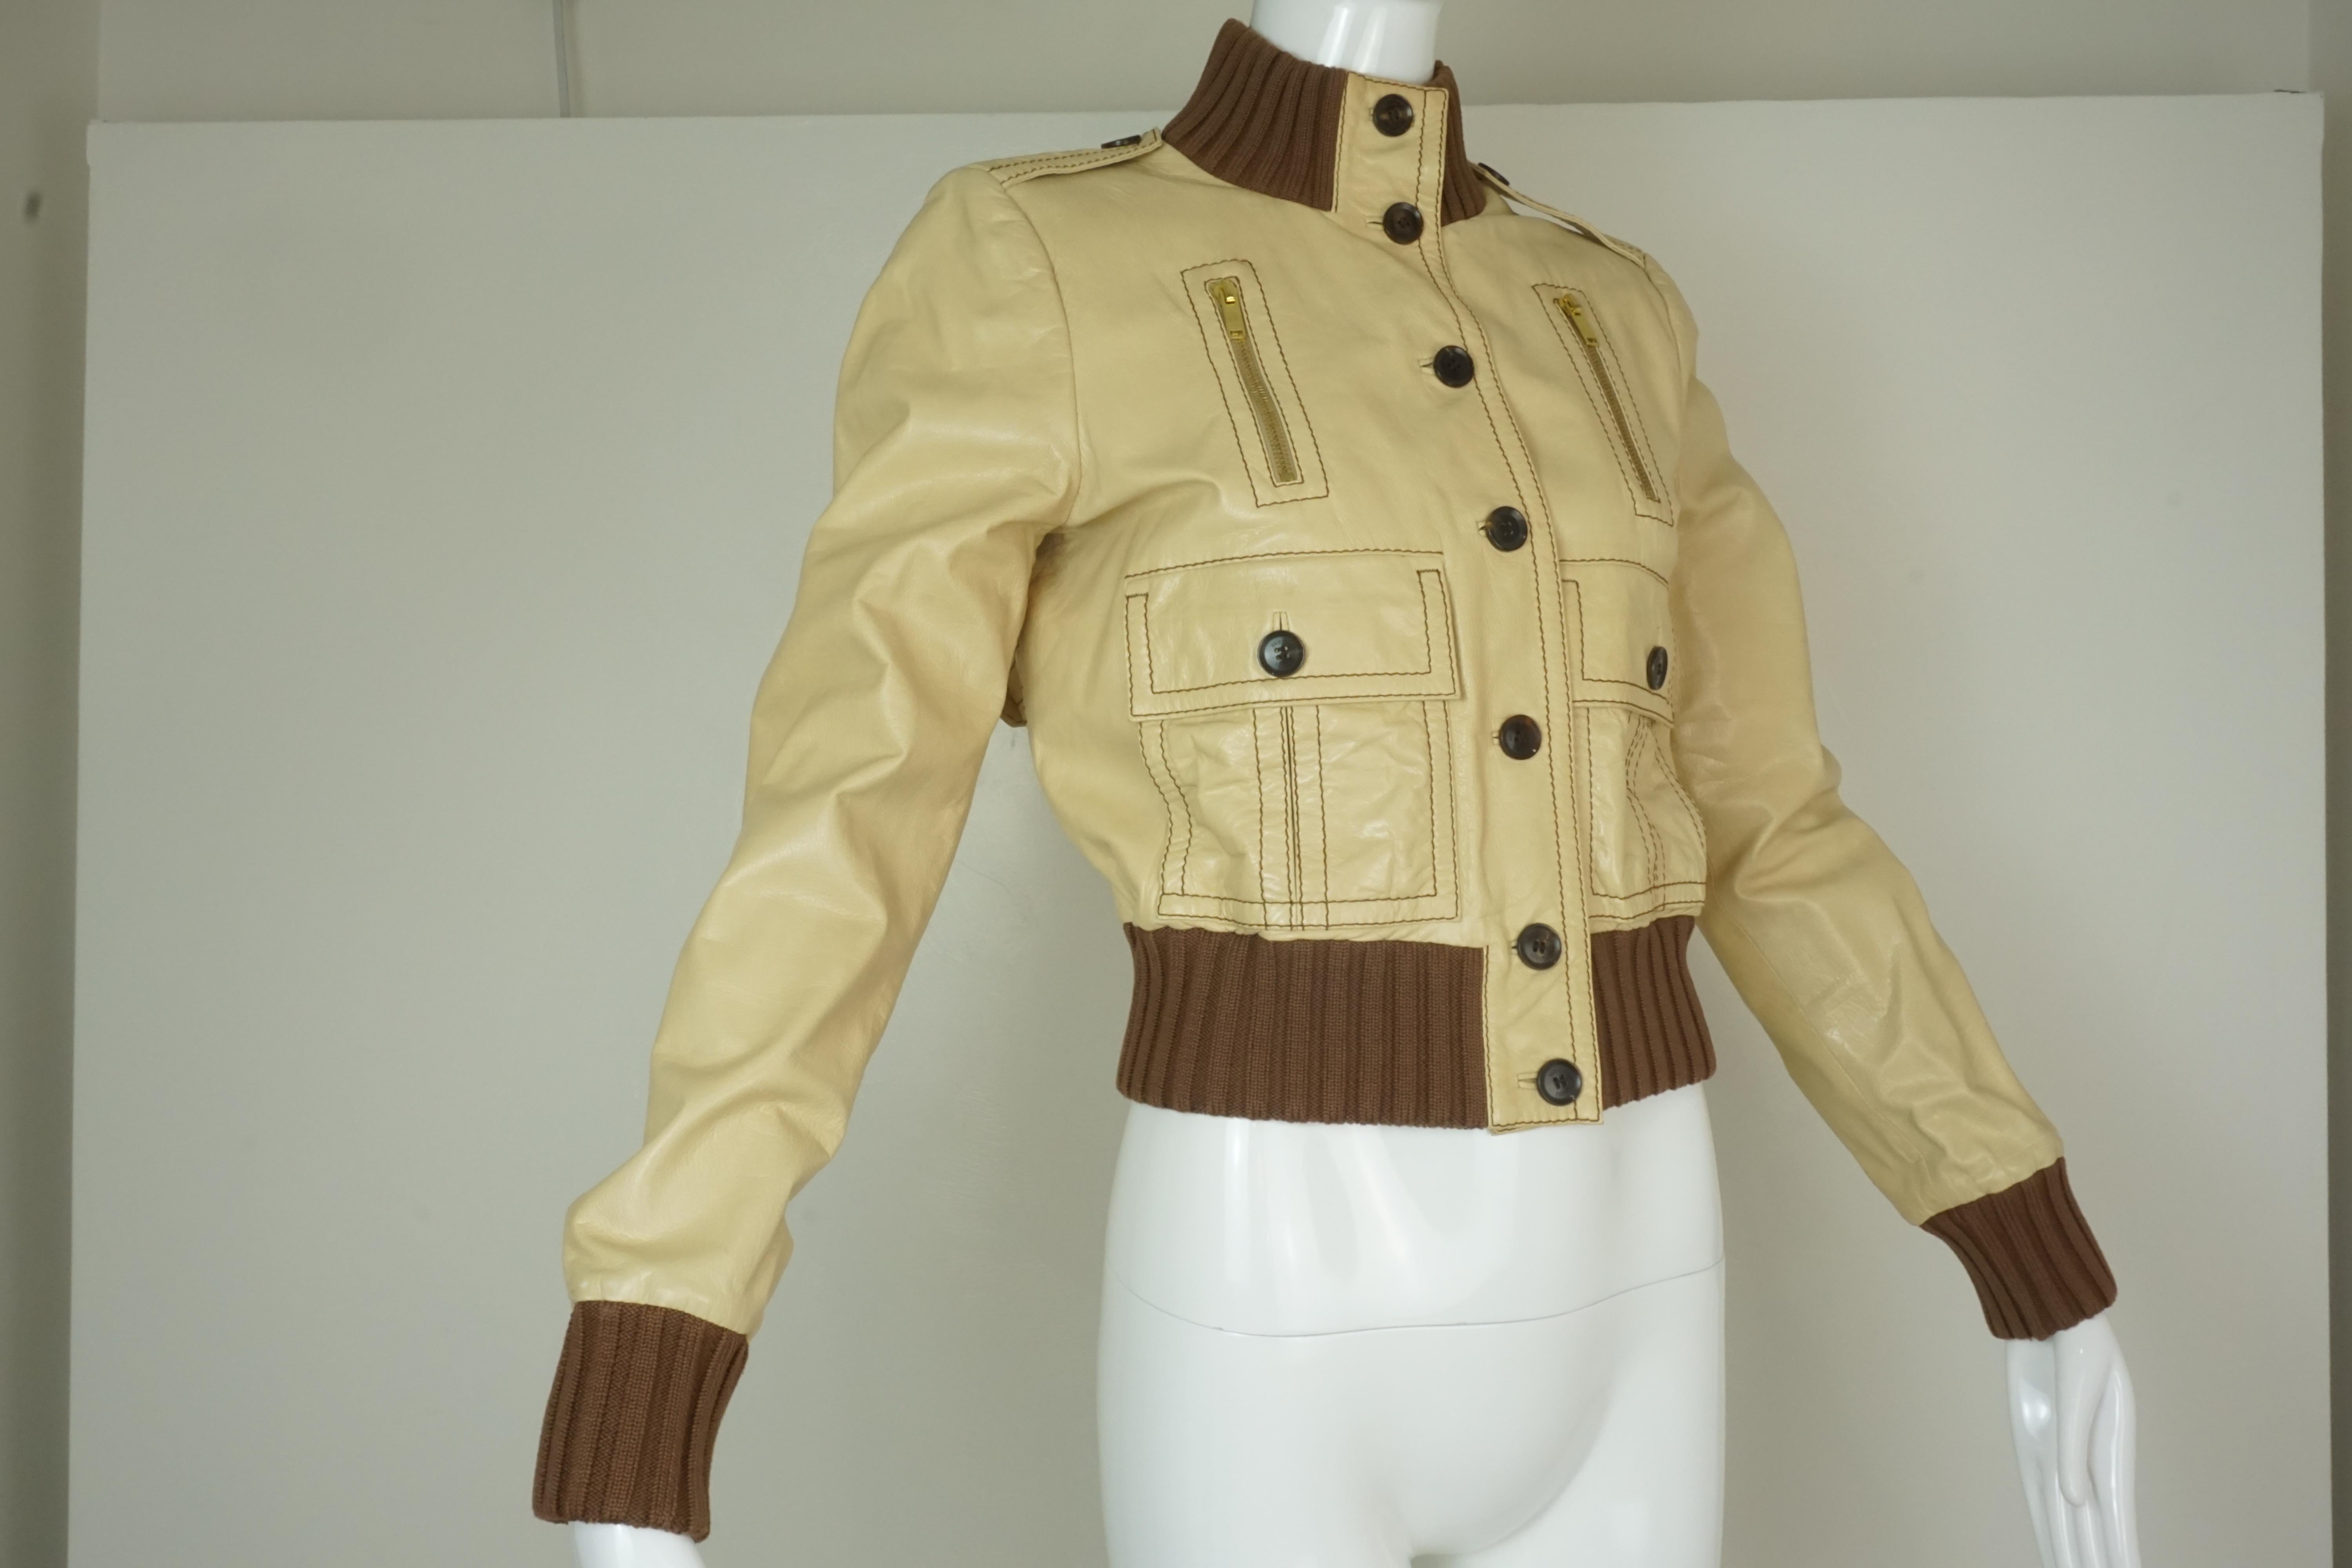 Gucci Light Tan Leather Cropped Bomber Jacket w/ Button Front, Knit Cuffs & Collar, Front pockets, and Adjustable Buckles at sides. Brown GG Gucci lining. Size 42/6. Made in Italy.

Foxy Couture is not an authorized reseller nor affiliated with any